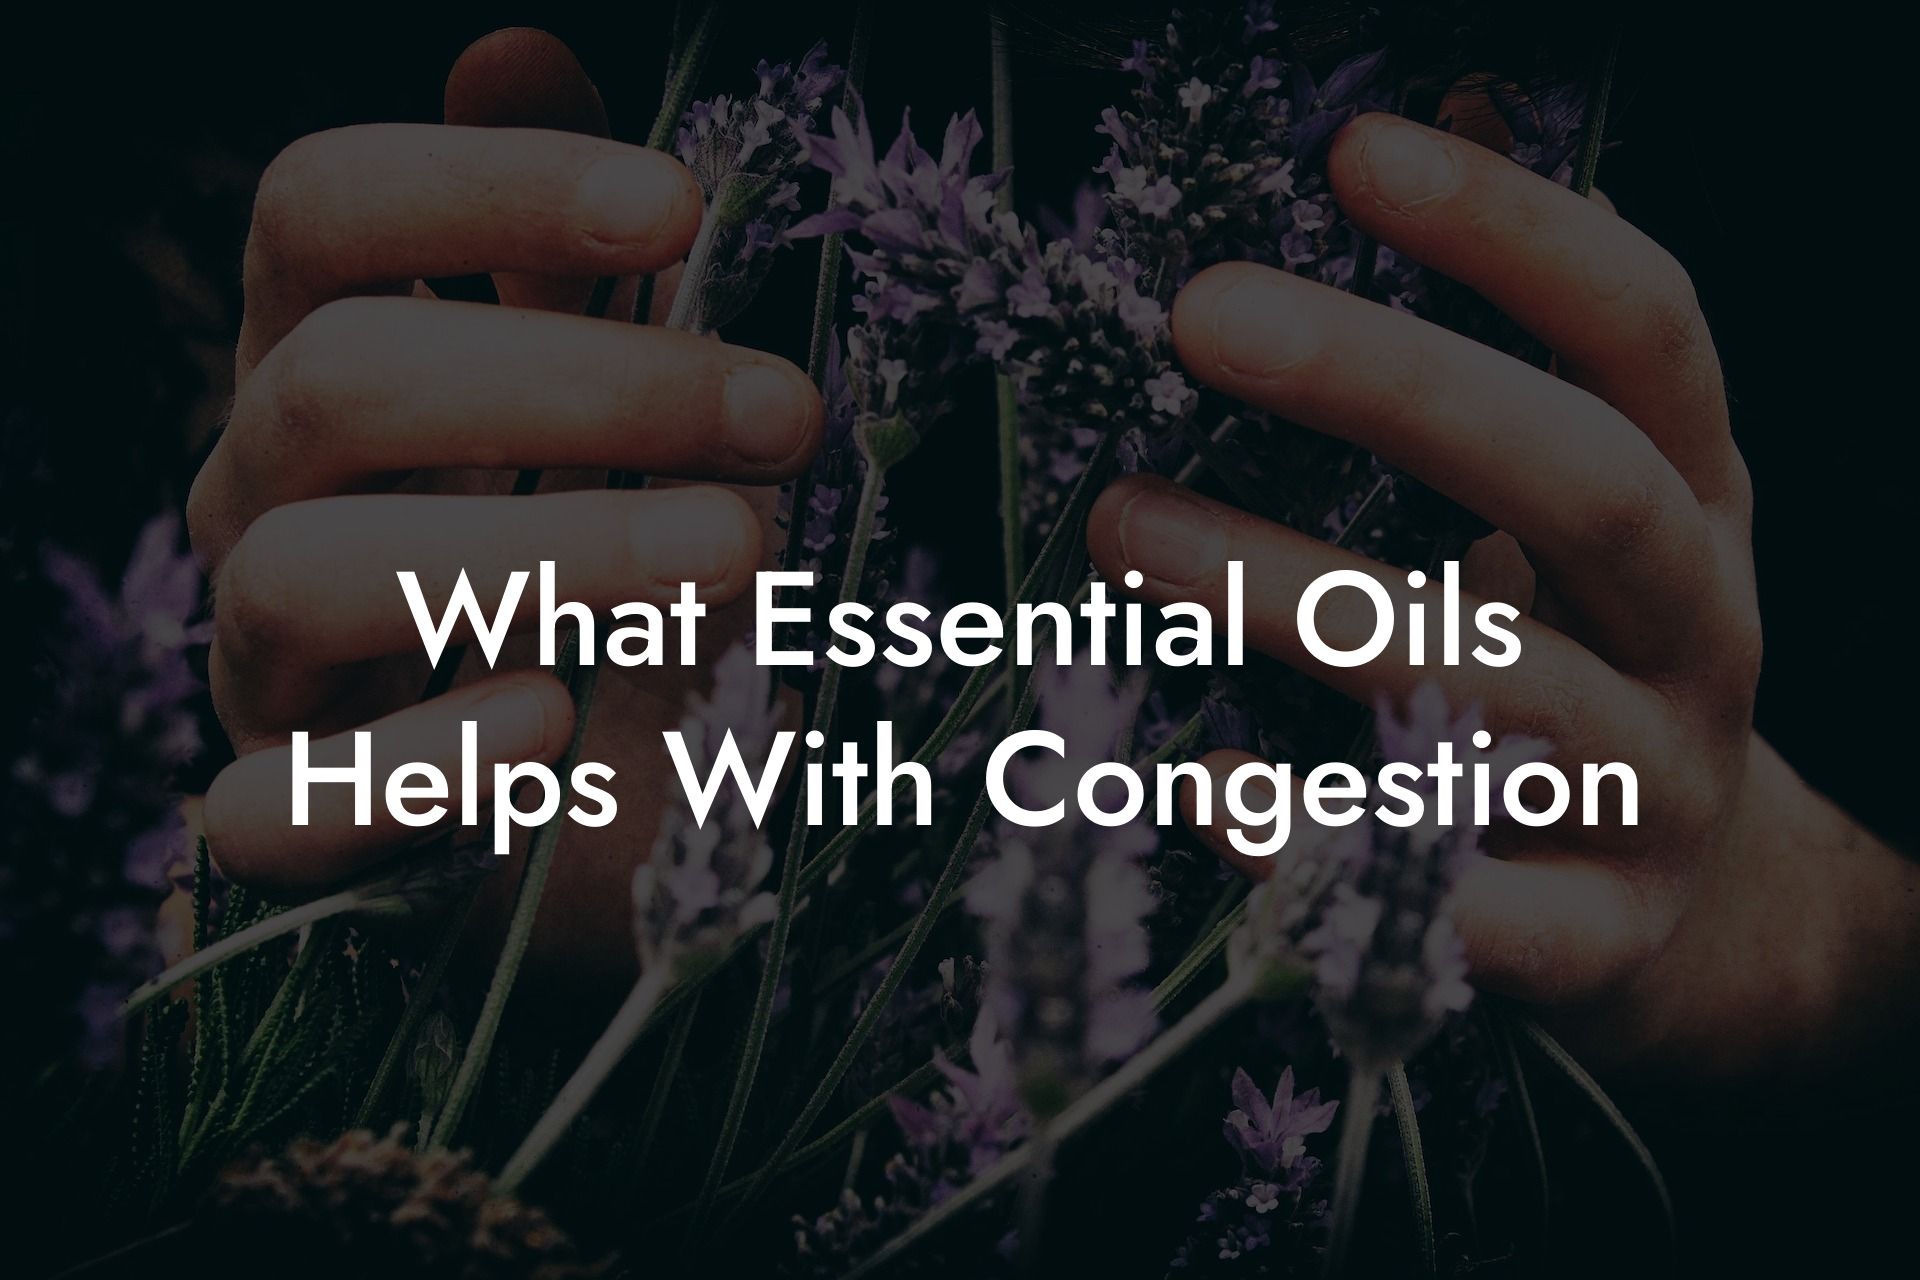 What Essential Oils Helps With Congestion